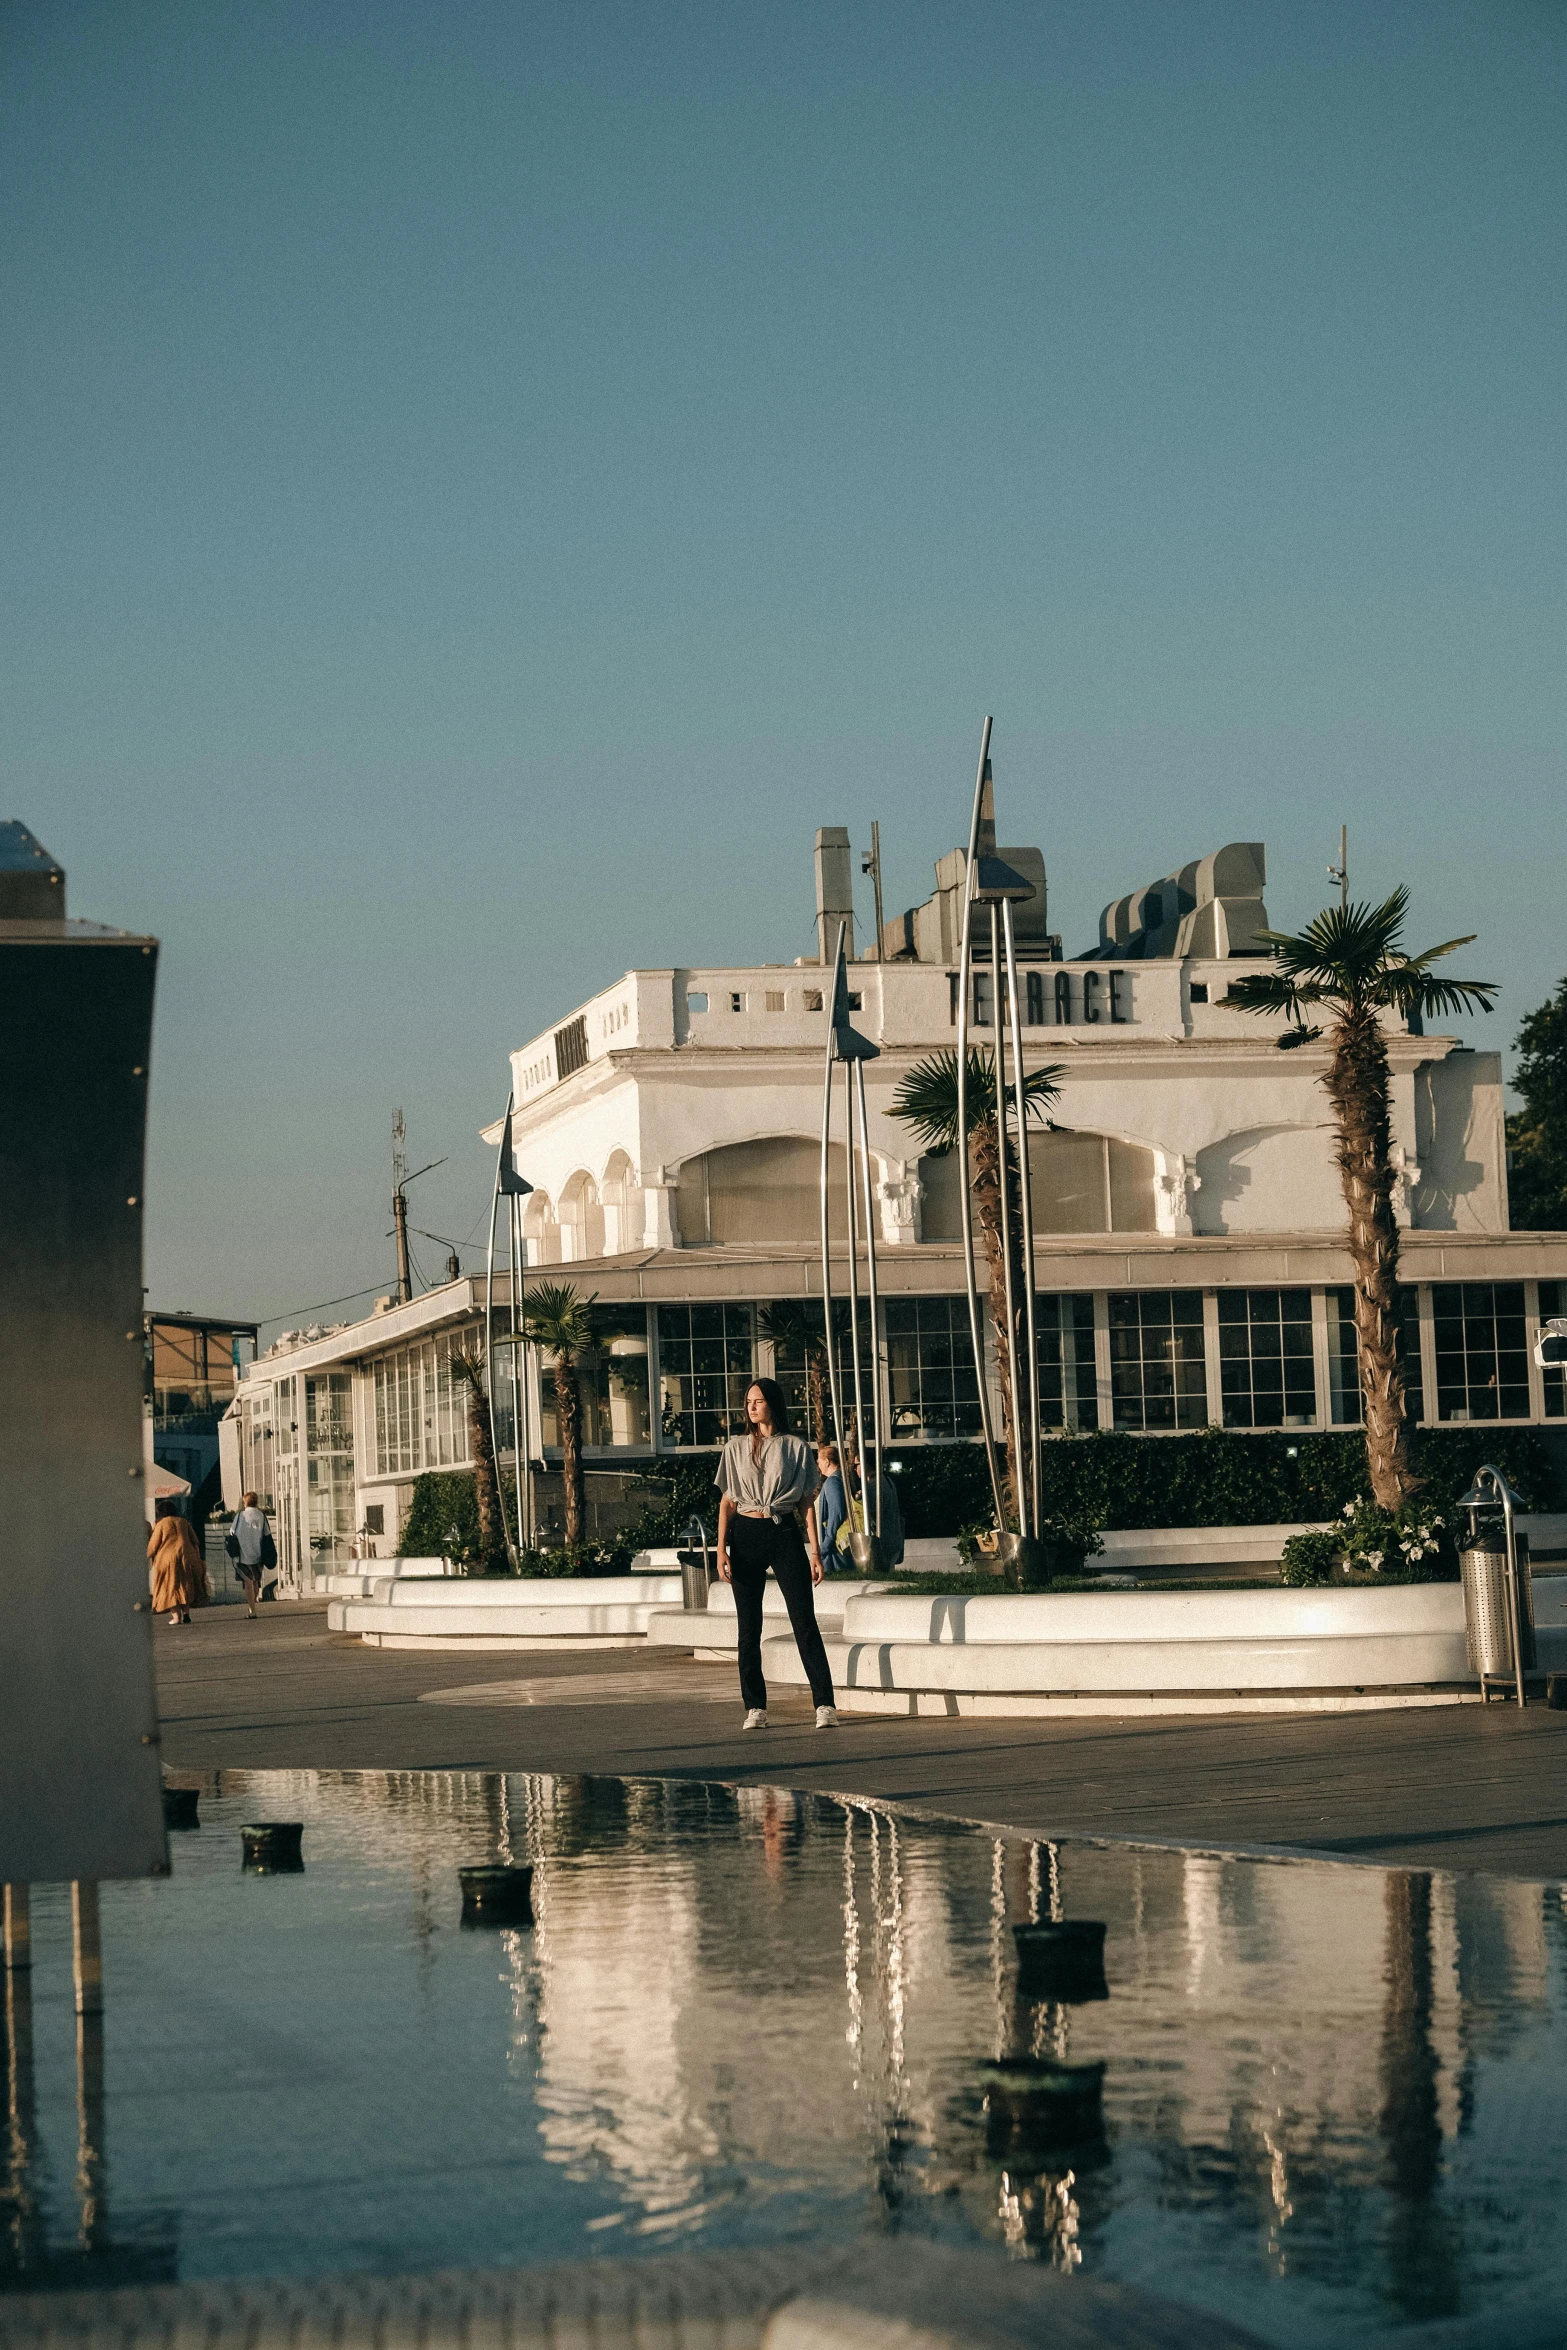 a man riding a skateboard down the side of a street, unsplash, modernism, docked at harbor, cannes, art deco architecture, standing on the water ground